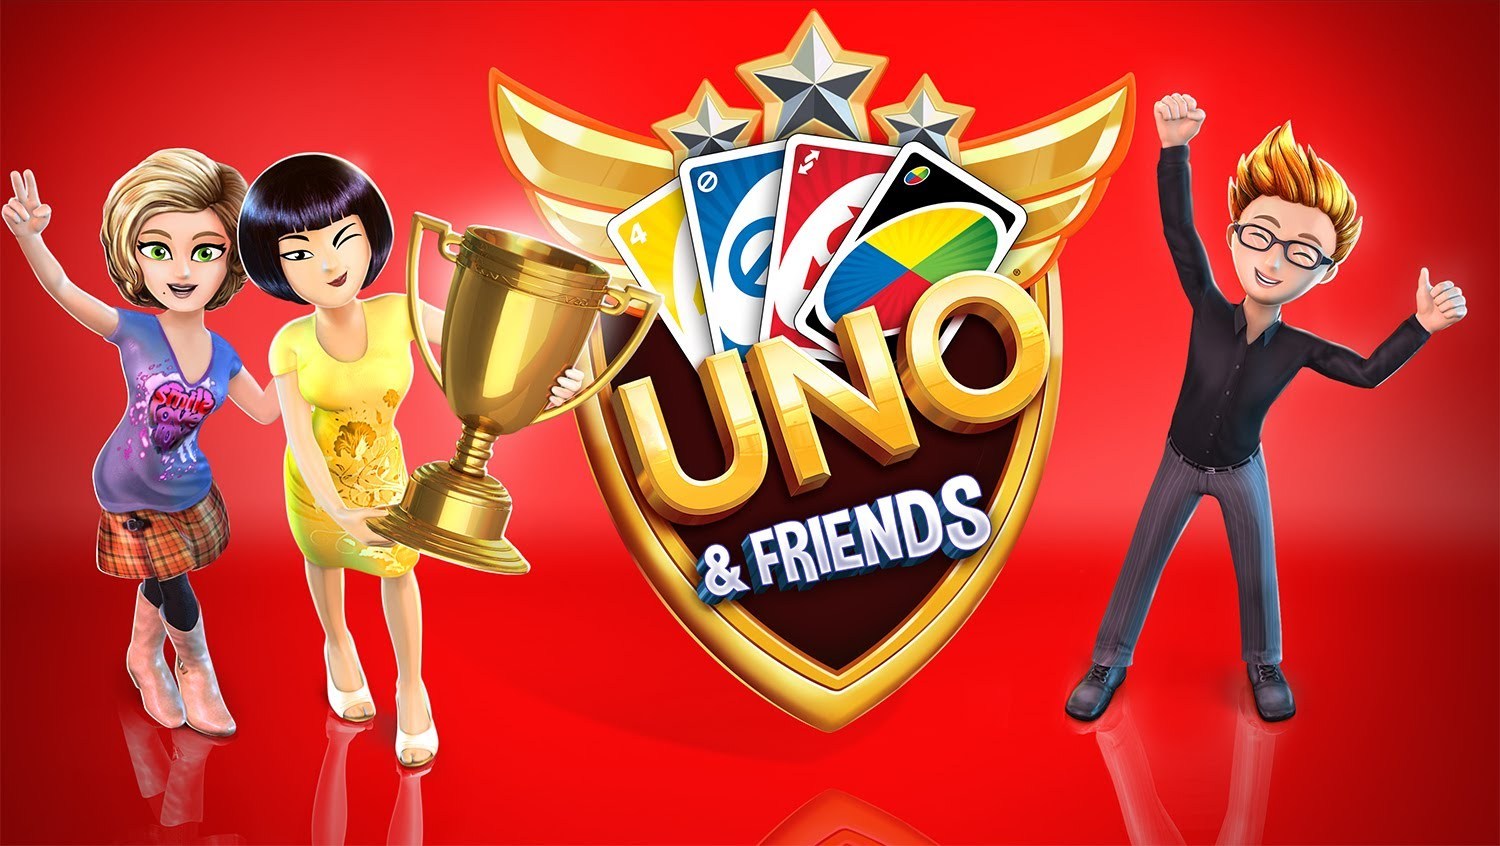 Uno Online: 4 Colors download the new for windows